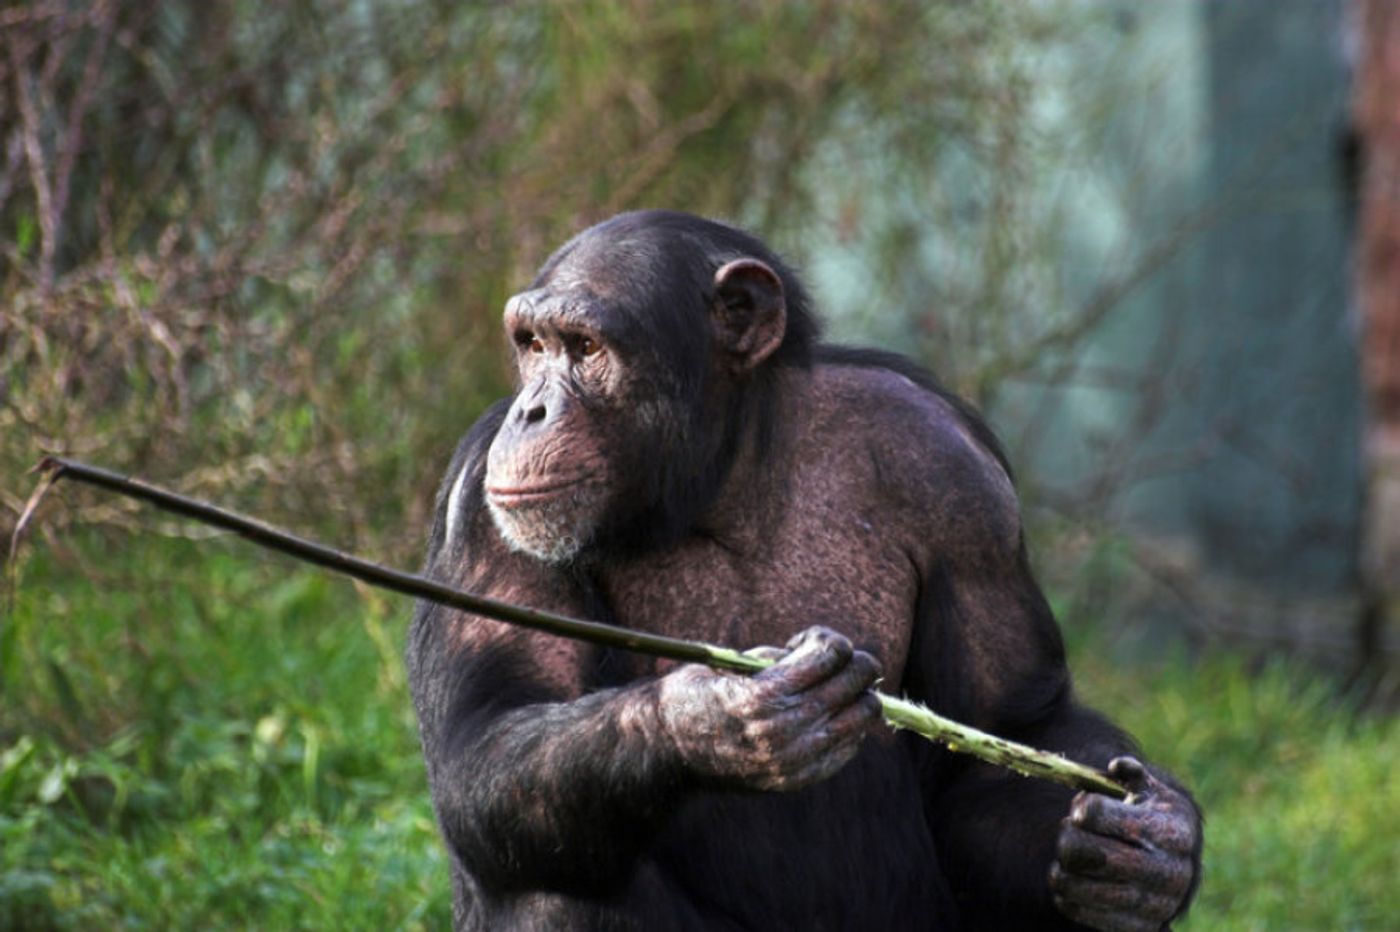 Chimpanzees use tools to look for food.